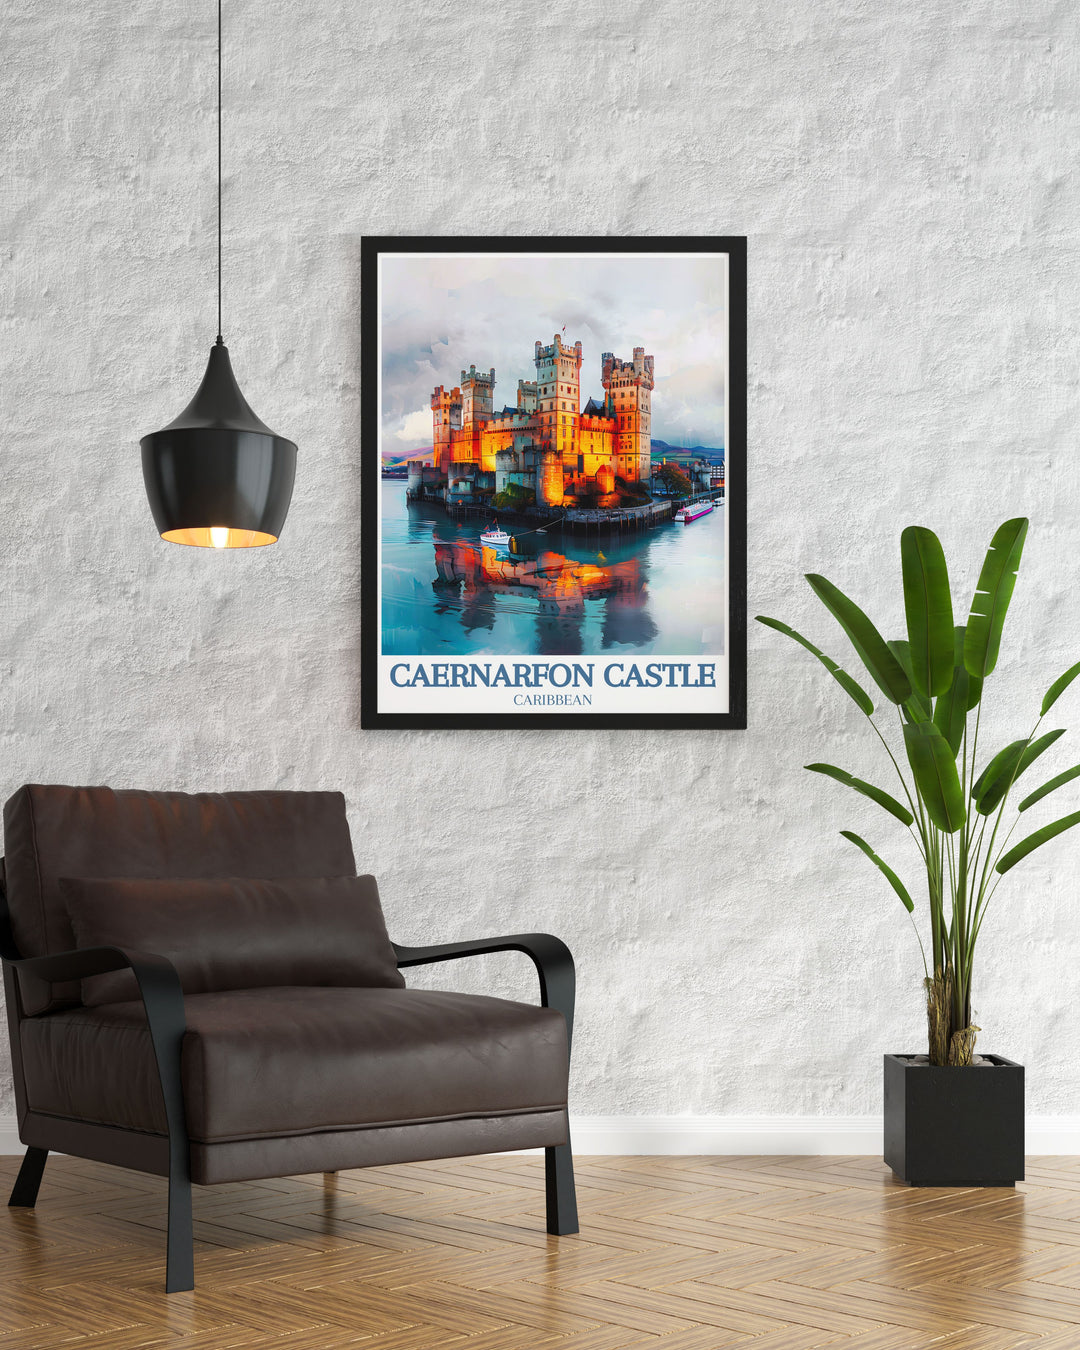 Elegant Caernarfon Castle wall art depicting the fortress, Beddgelert Village, and Snowdon Ranger, showcasing the areas natural and historical beauty. Perfect for adding sophistication and a touch of Welsh heritage to any room.